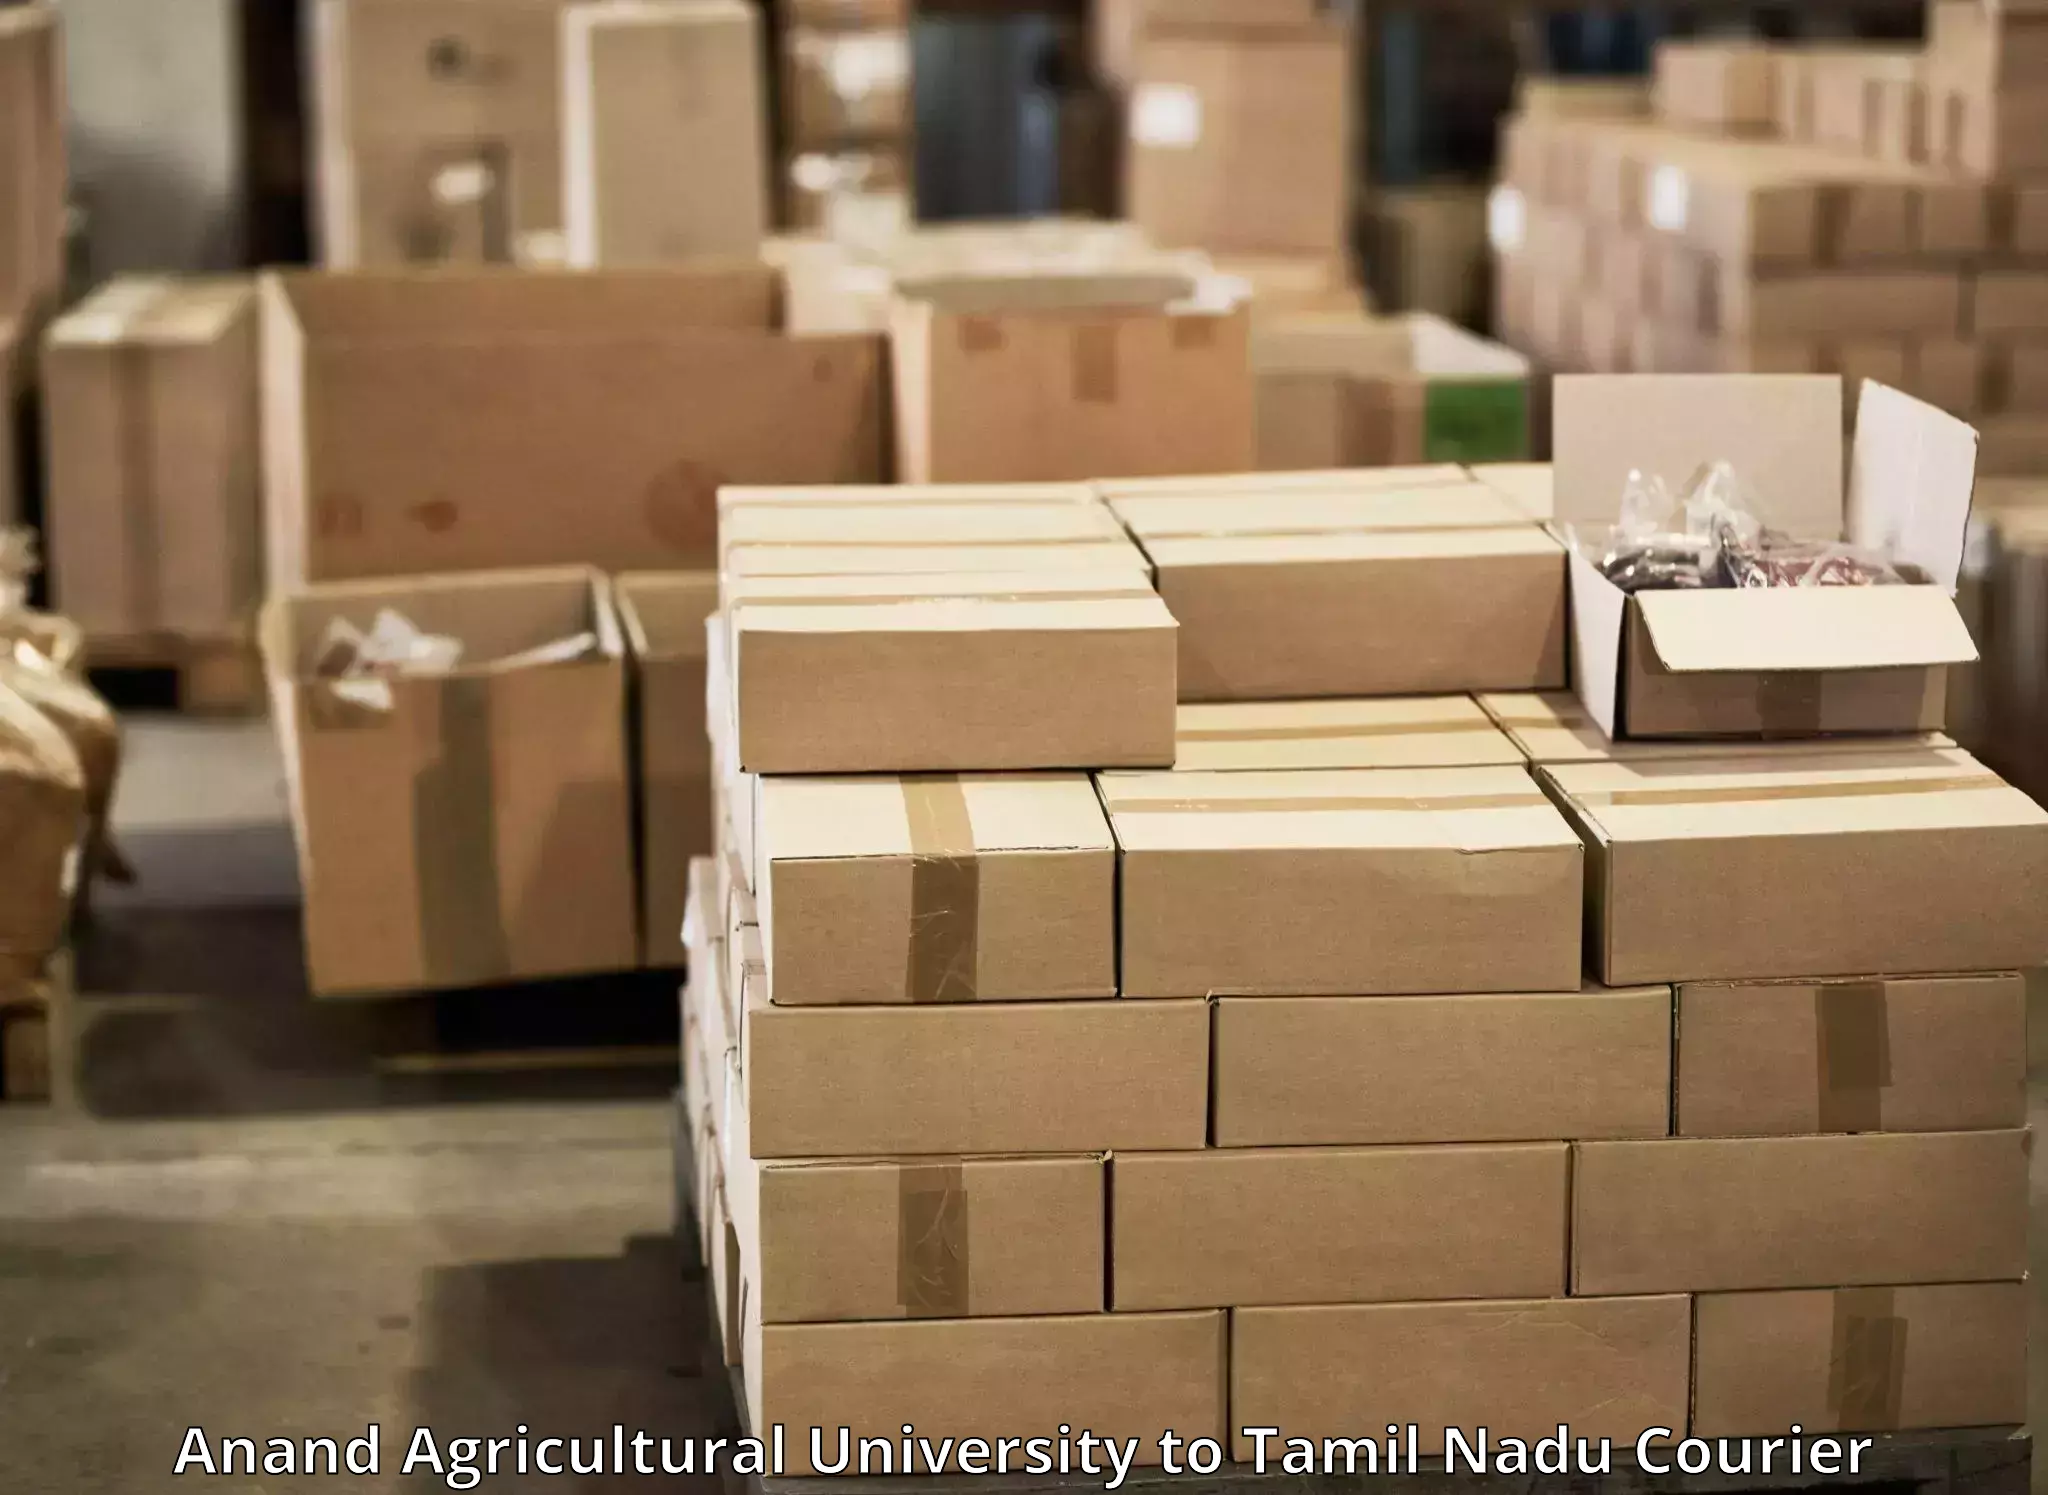 Express delivery capabilities in Anand Agricultural University to Ambattur